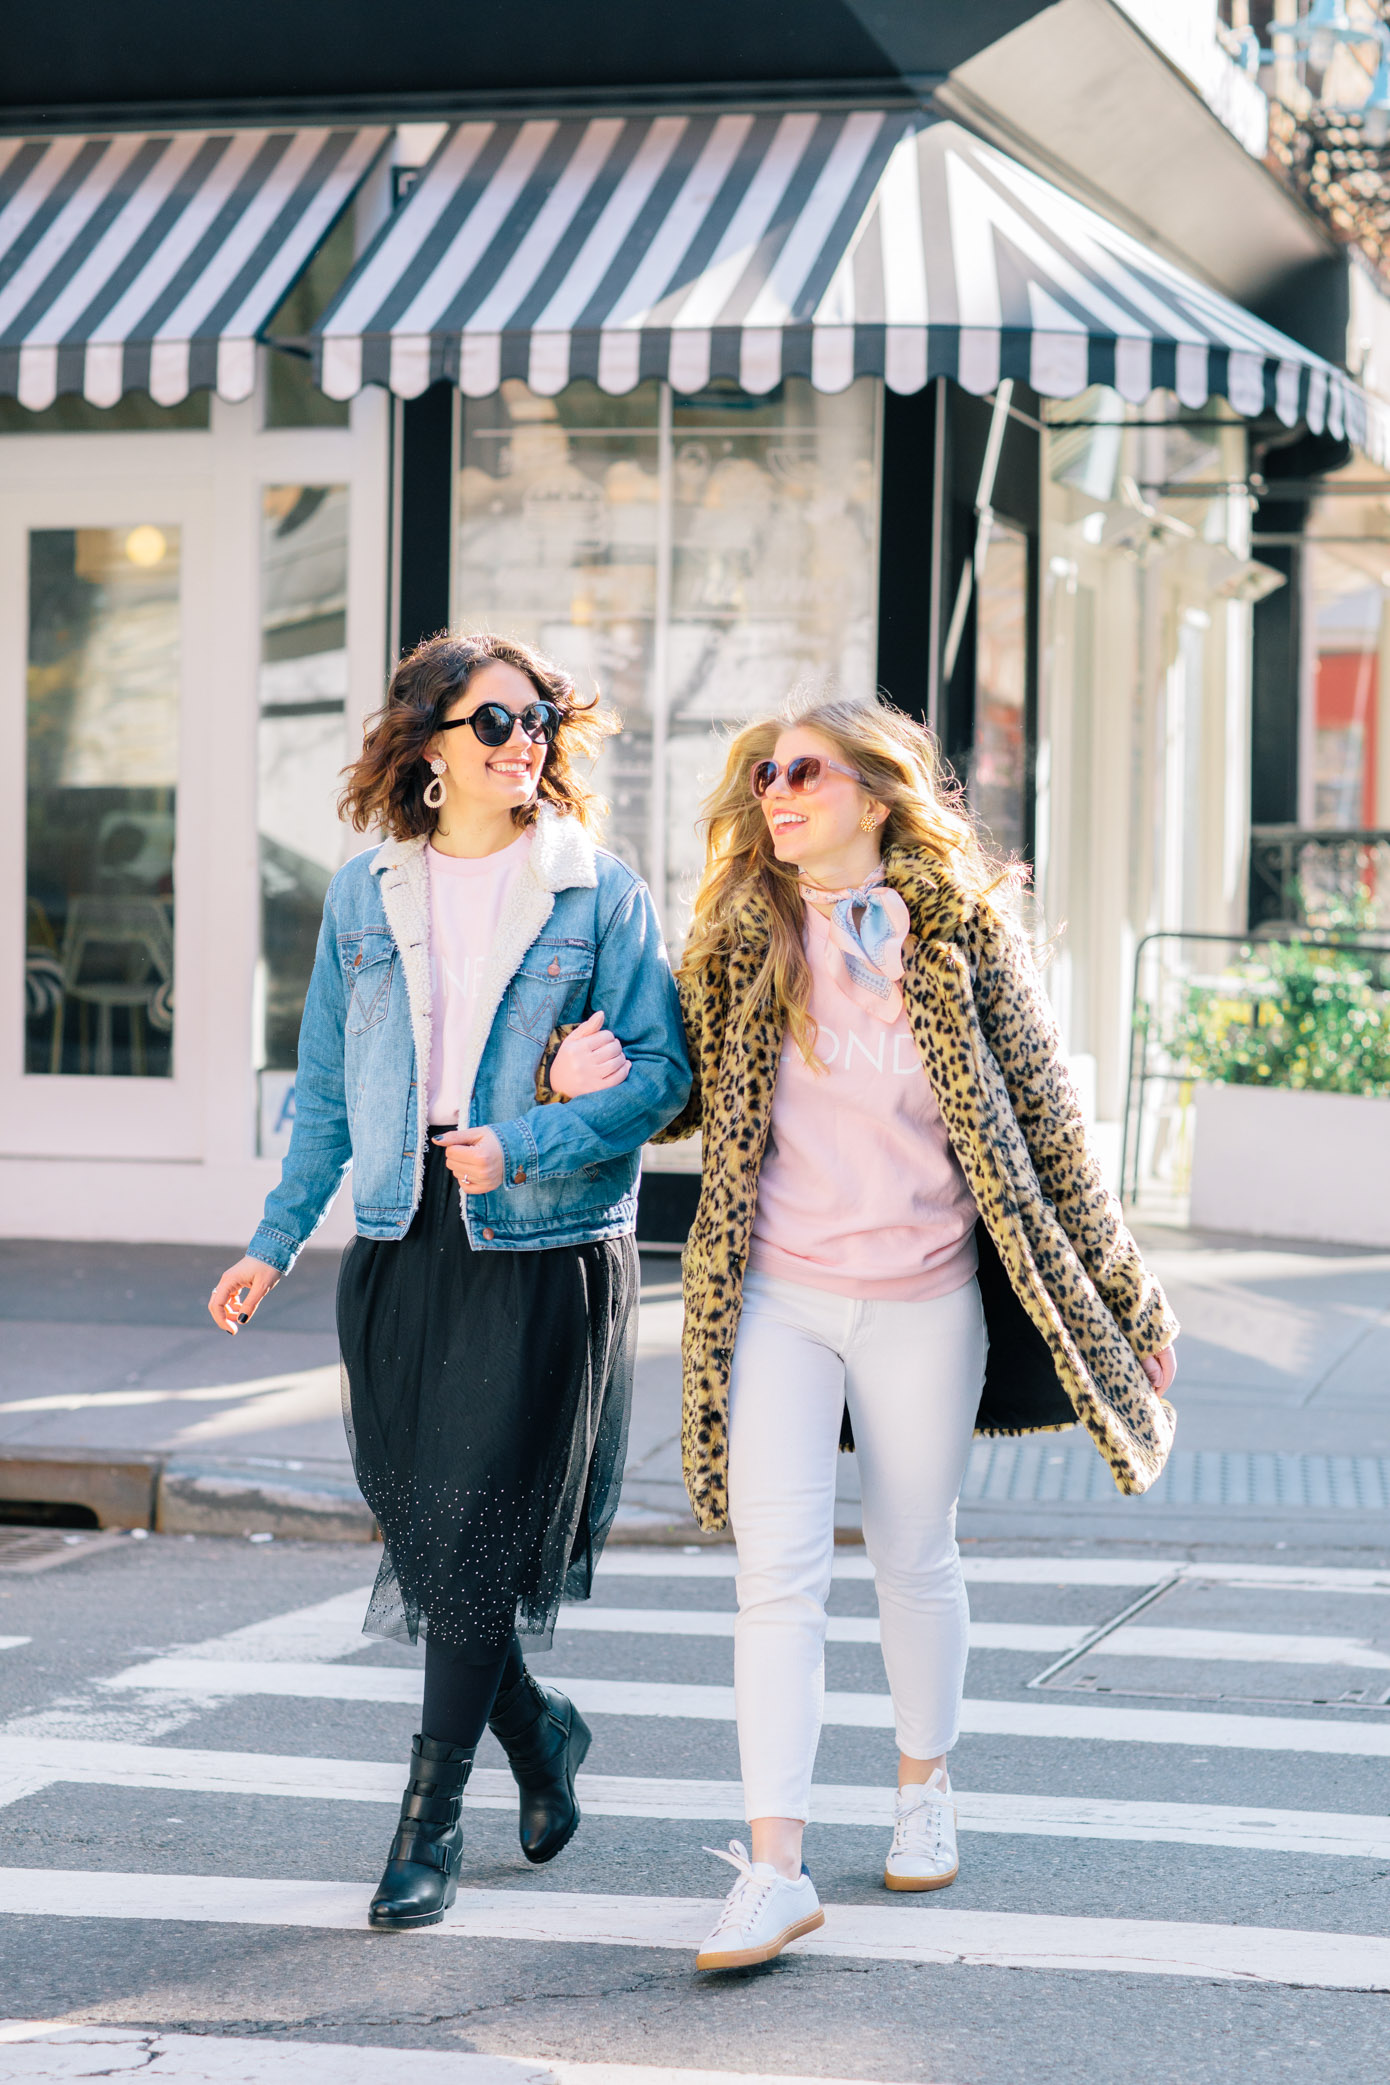 How to Style a Leopard Faux Fur Coat | Louella Reese Life & Style Blog